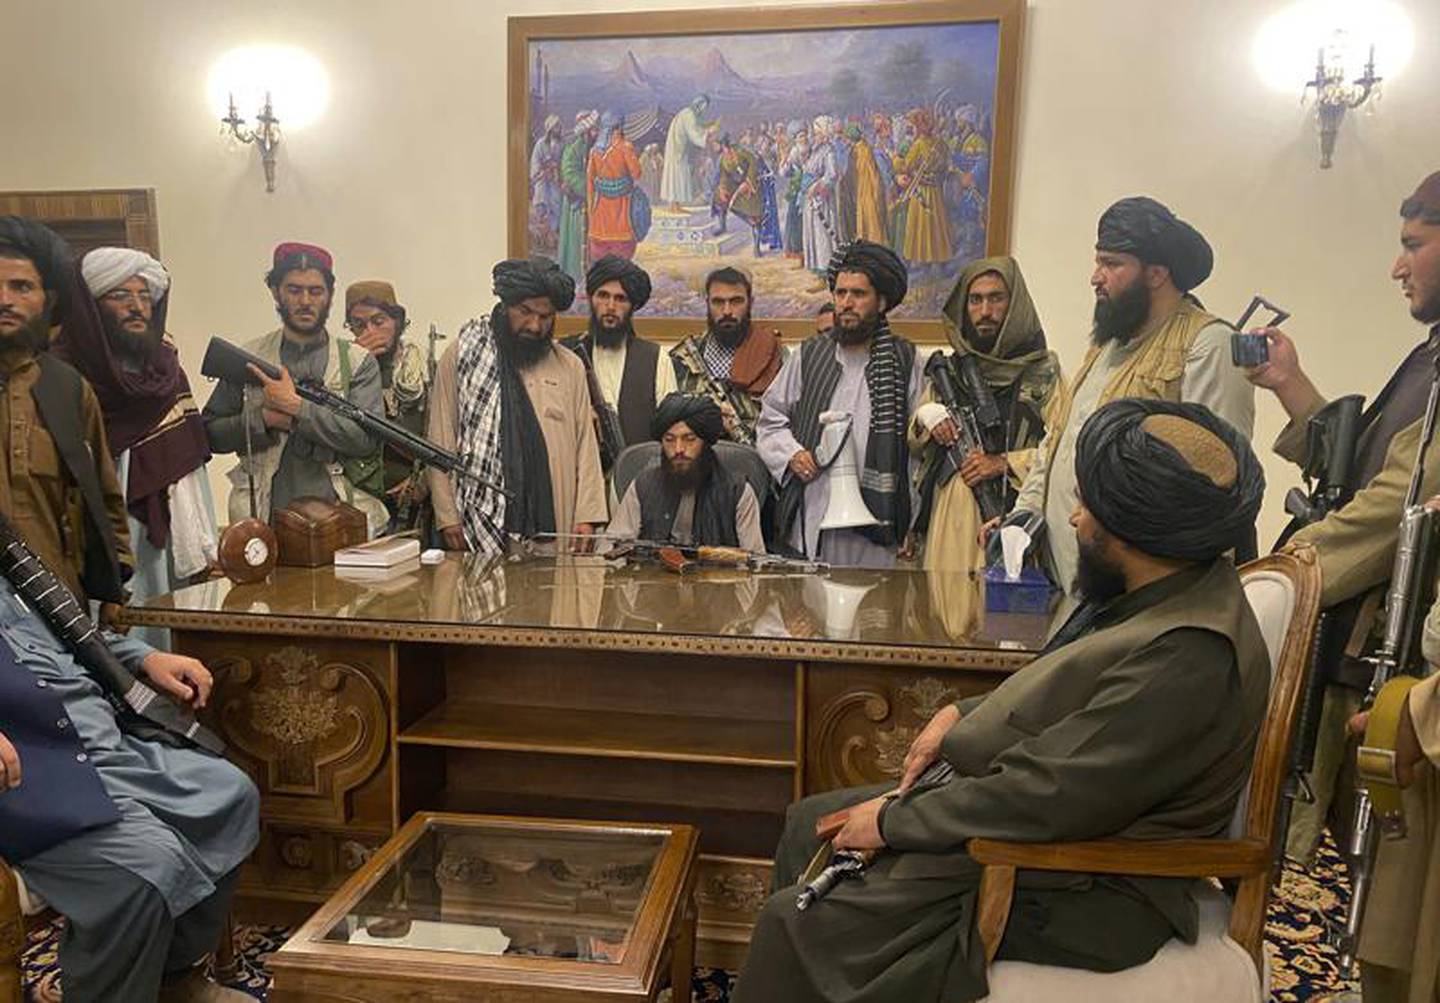 Taliban fighters take control of Afghan presidential palace after the Afghan President Ashraf Ghani fled the country, in Kabul, Afghanistan, Sunday, Aug. 15, 2021. Photo / AP